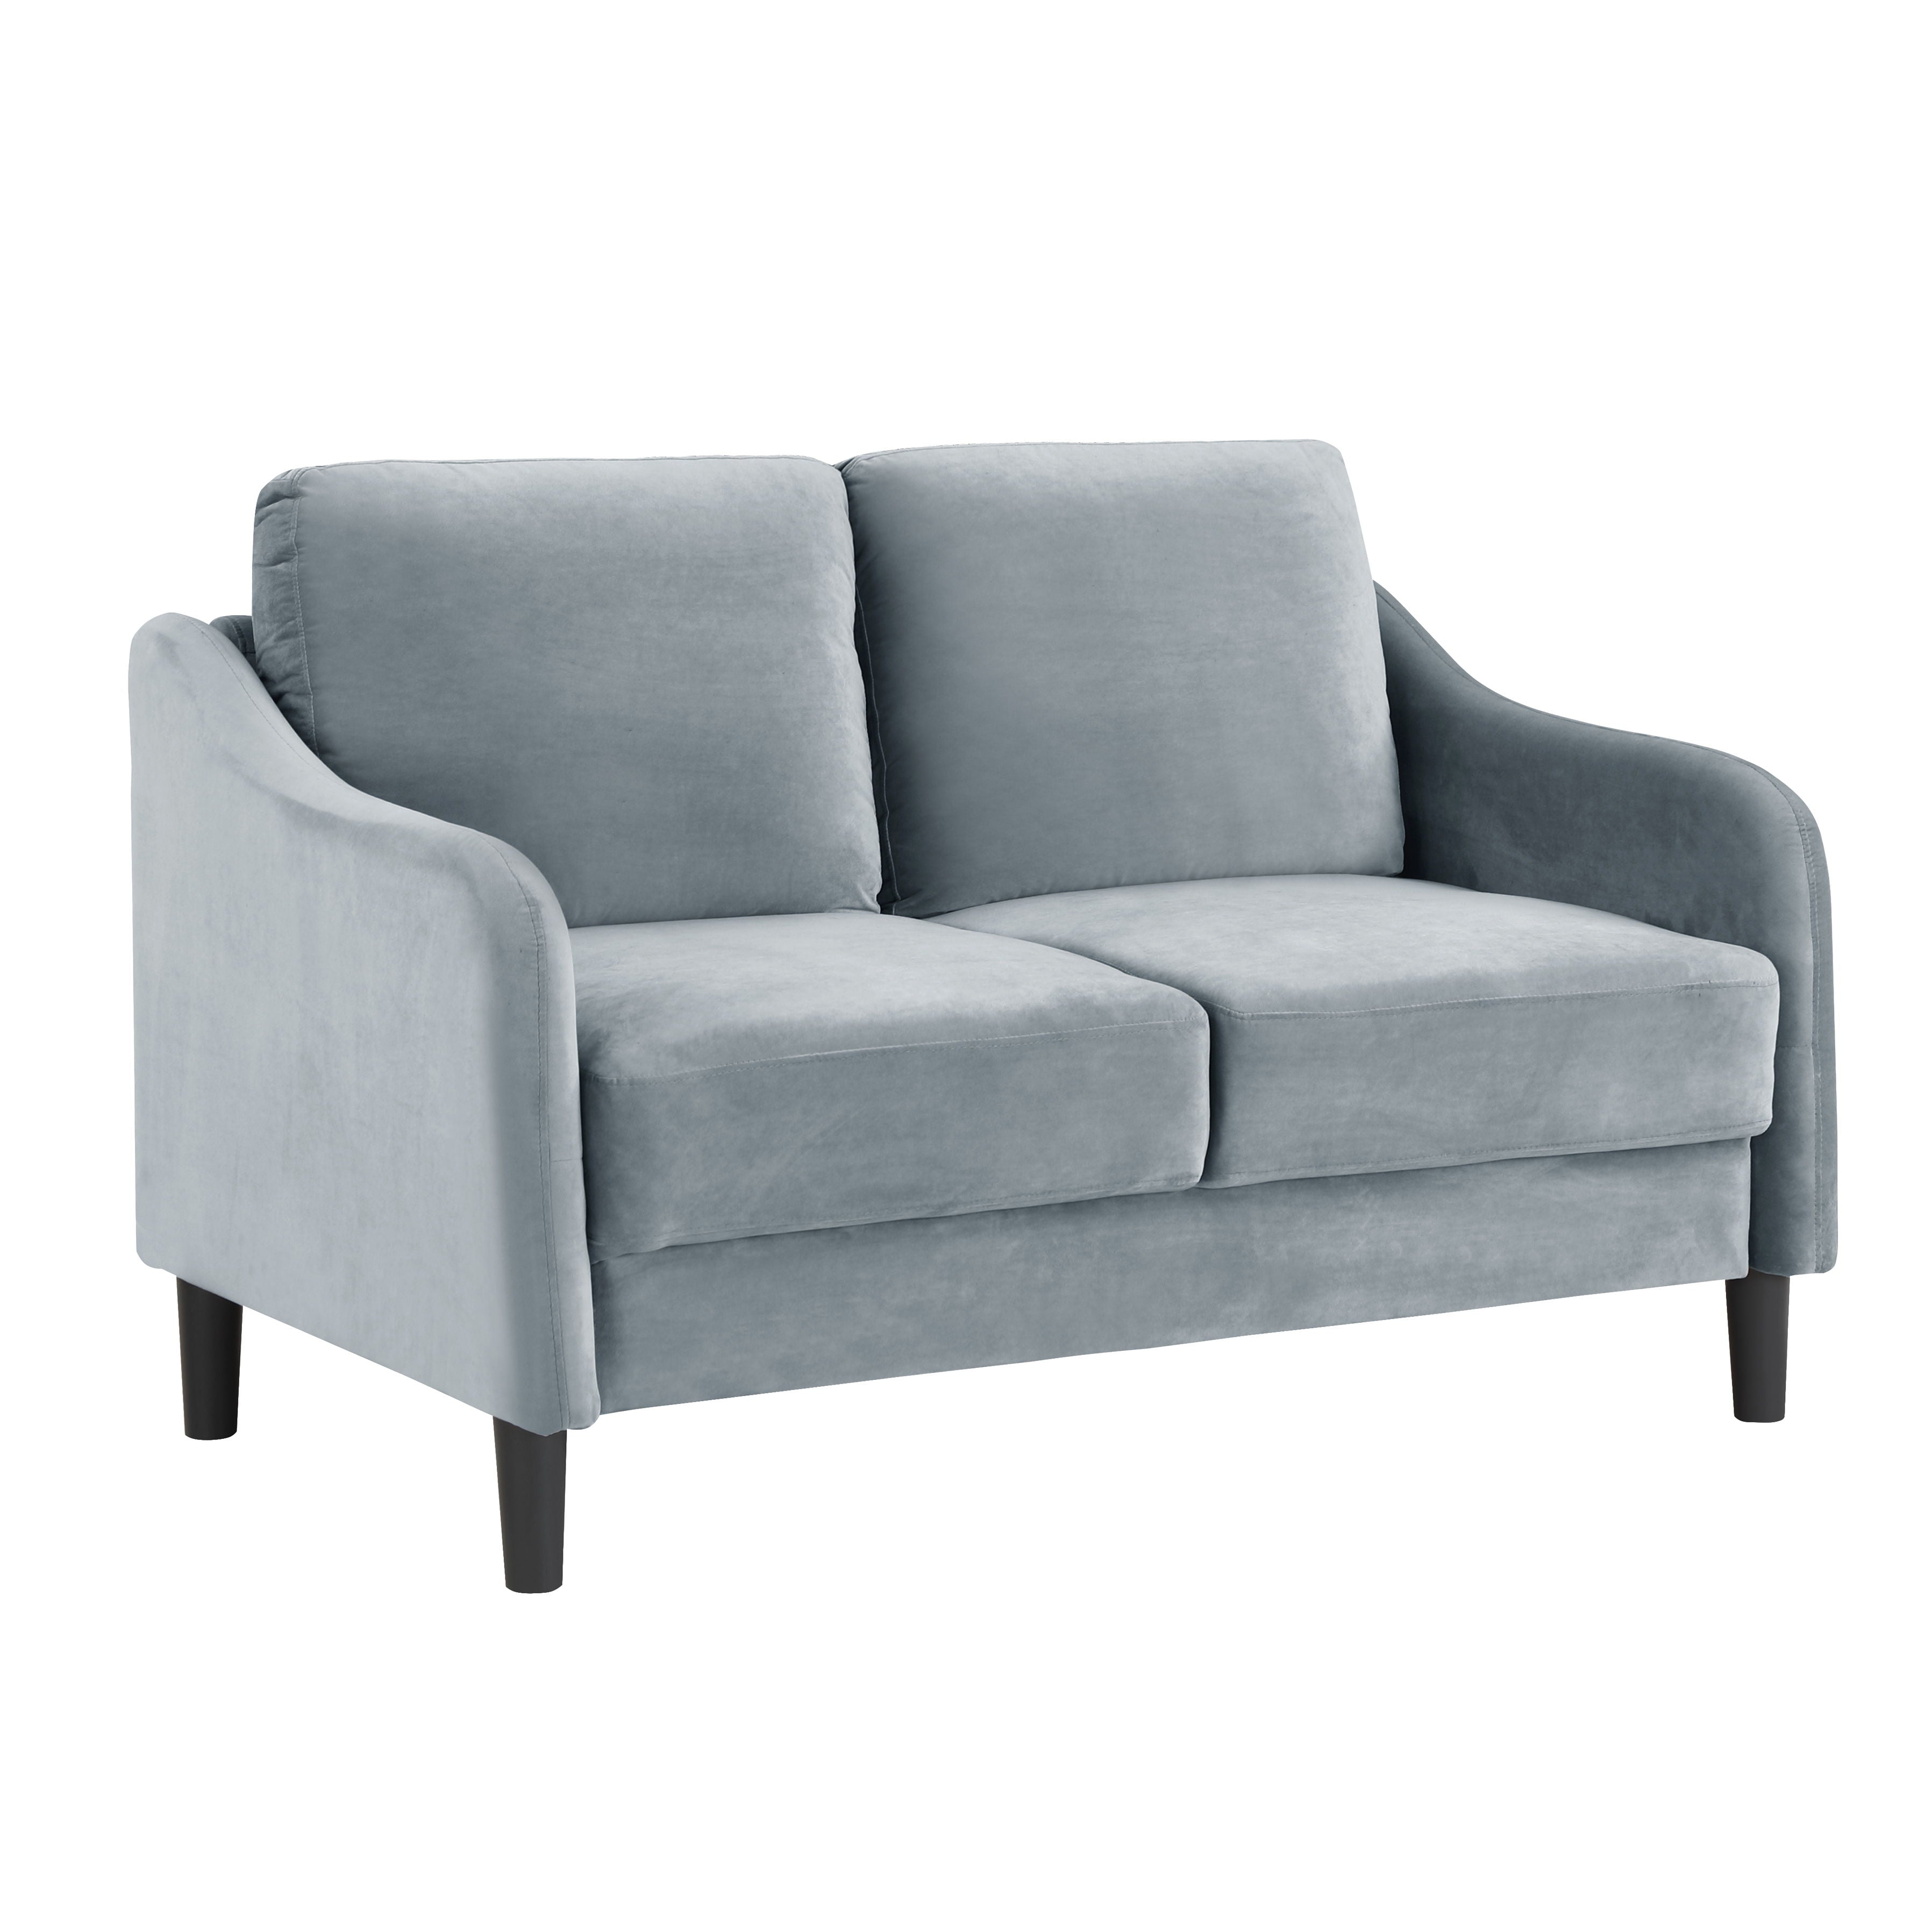 51.5" Loveseat Sofa Small Couch For Small Space For Living Room, Bedroom, Grey